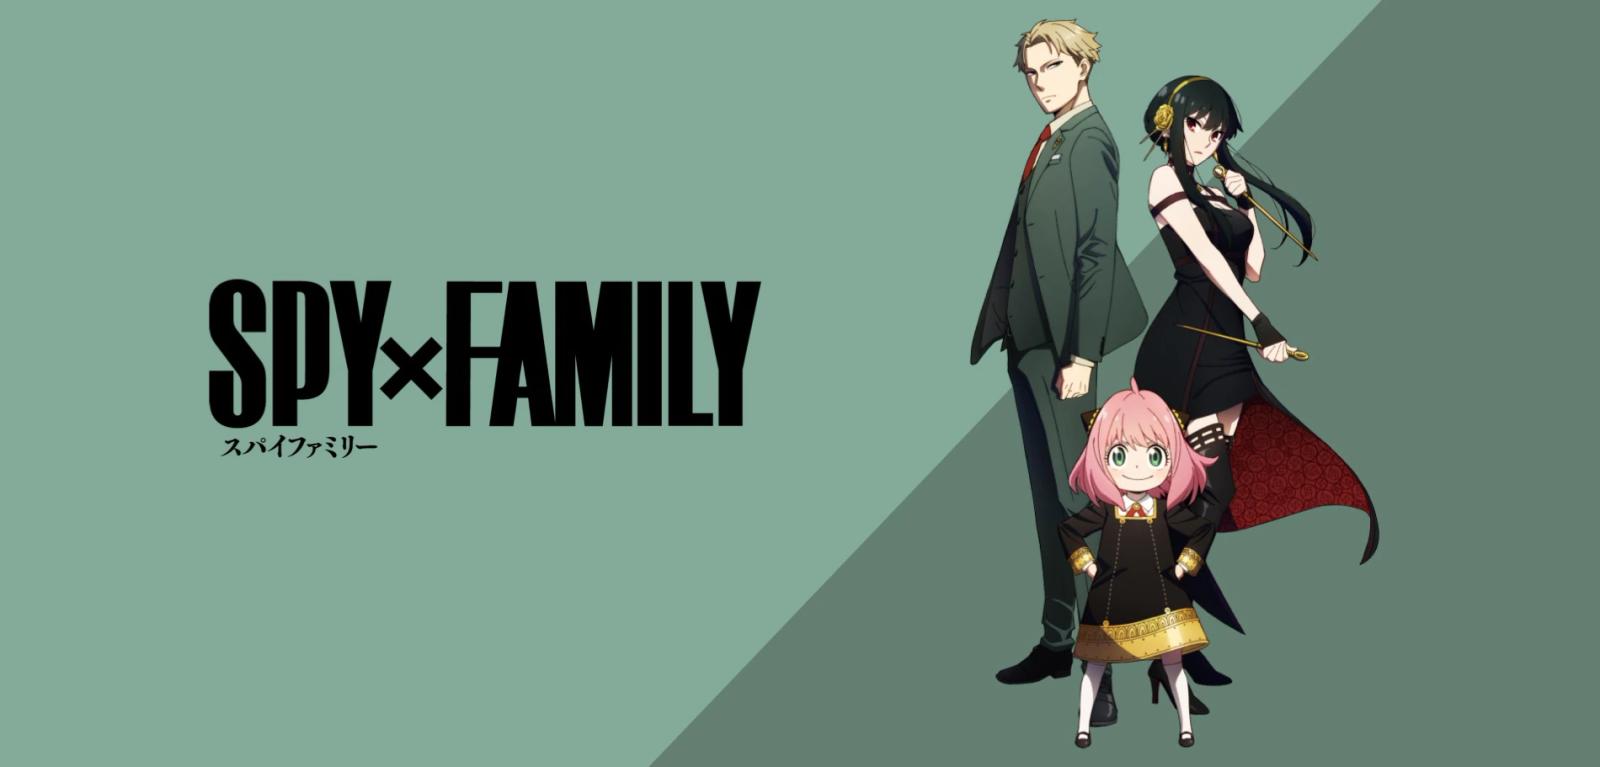 Spy x Family art with Loid Forger, Yor Forger, and Anya Forger